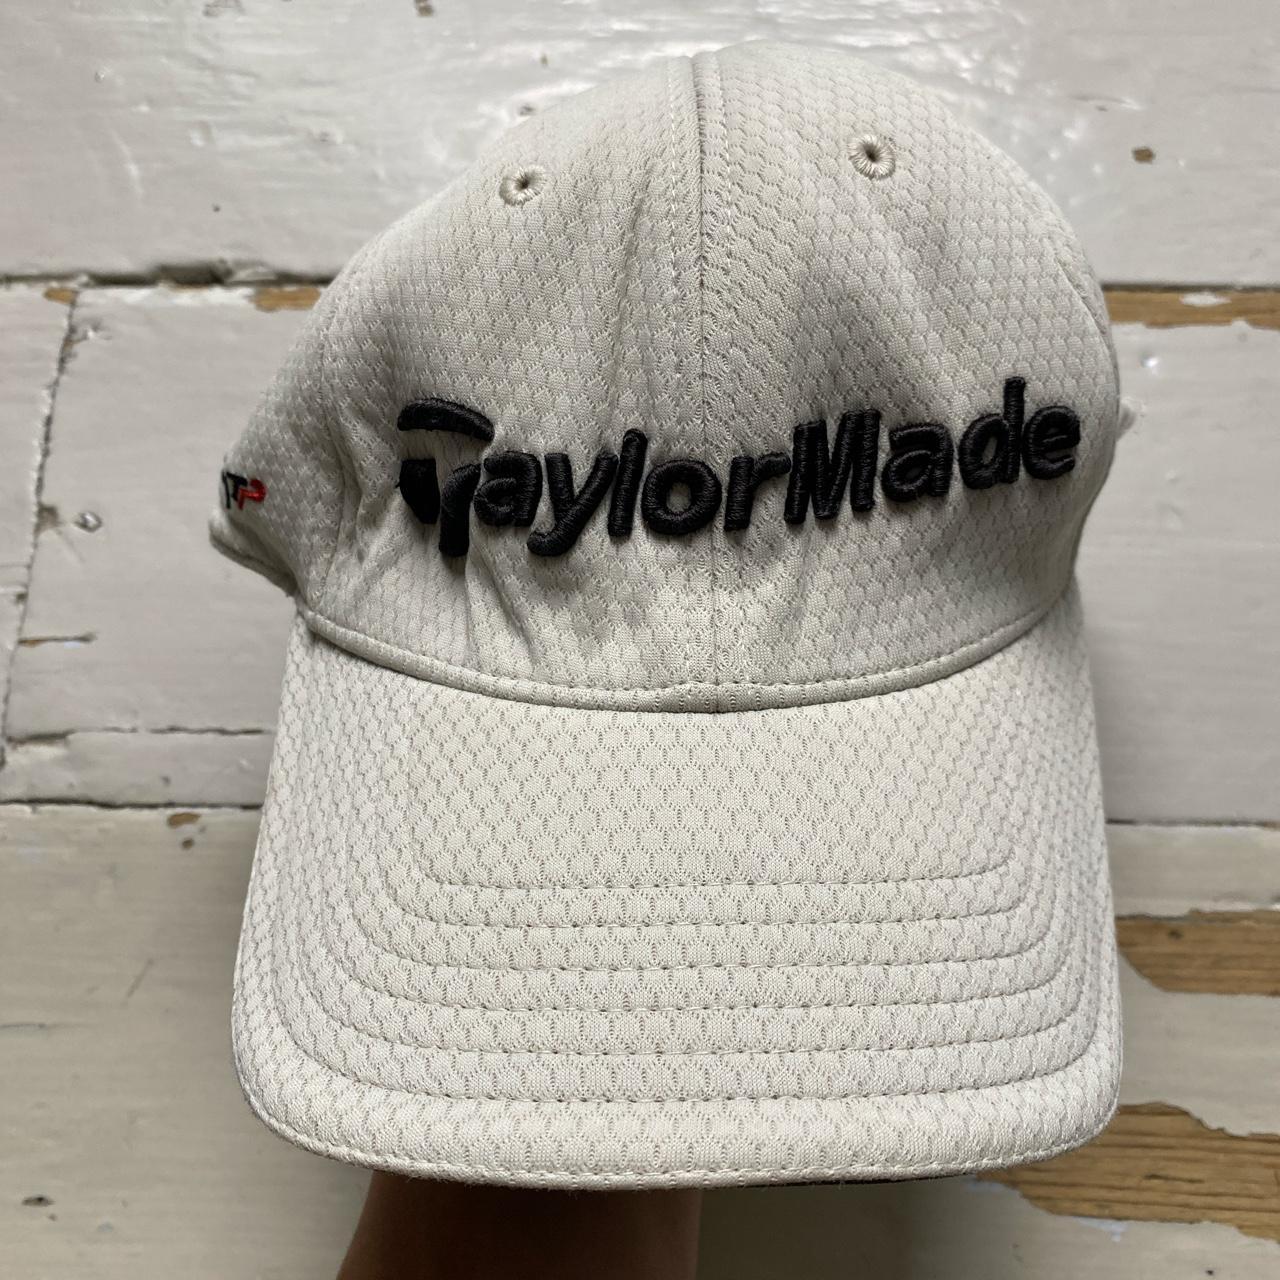 Adidas Taylor Made White and Black Fitted Baseball Cap